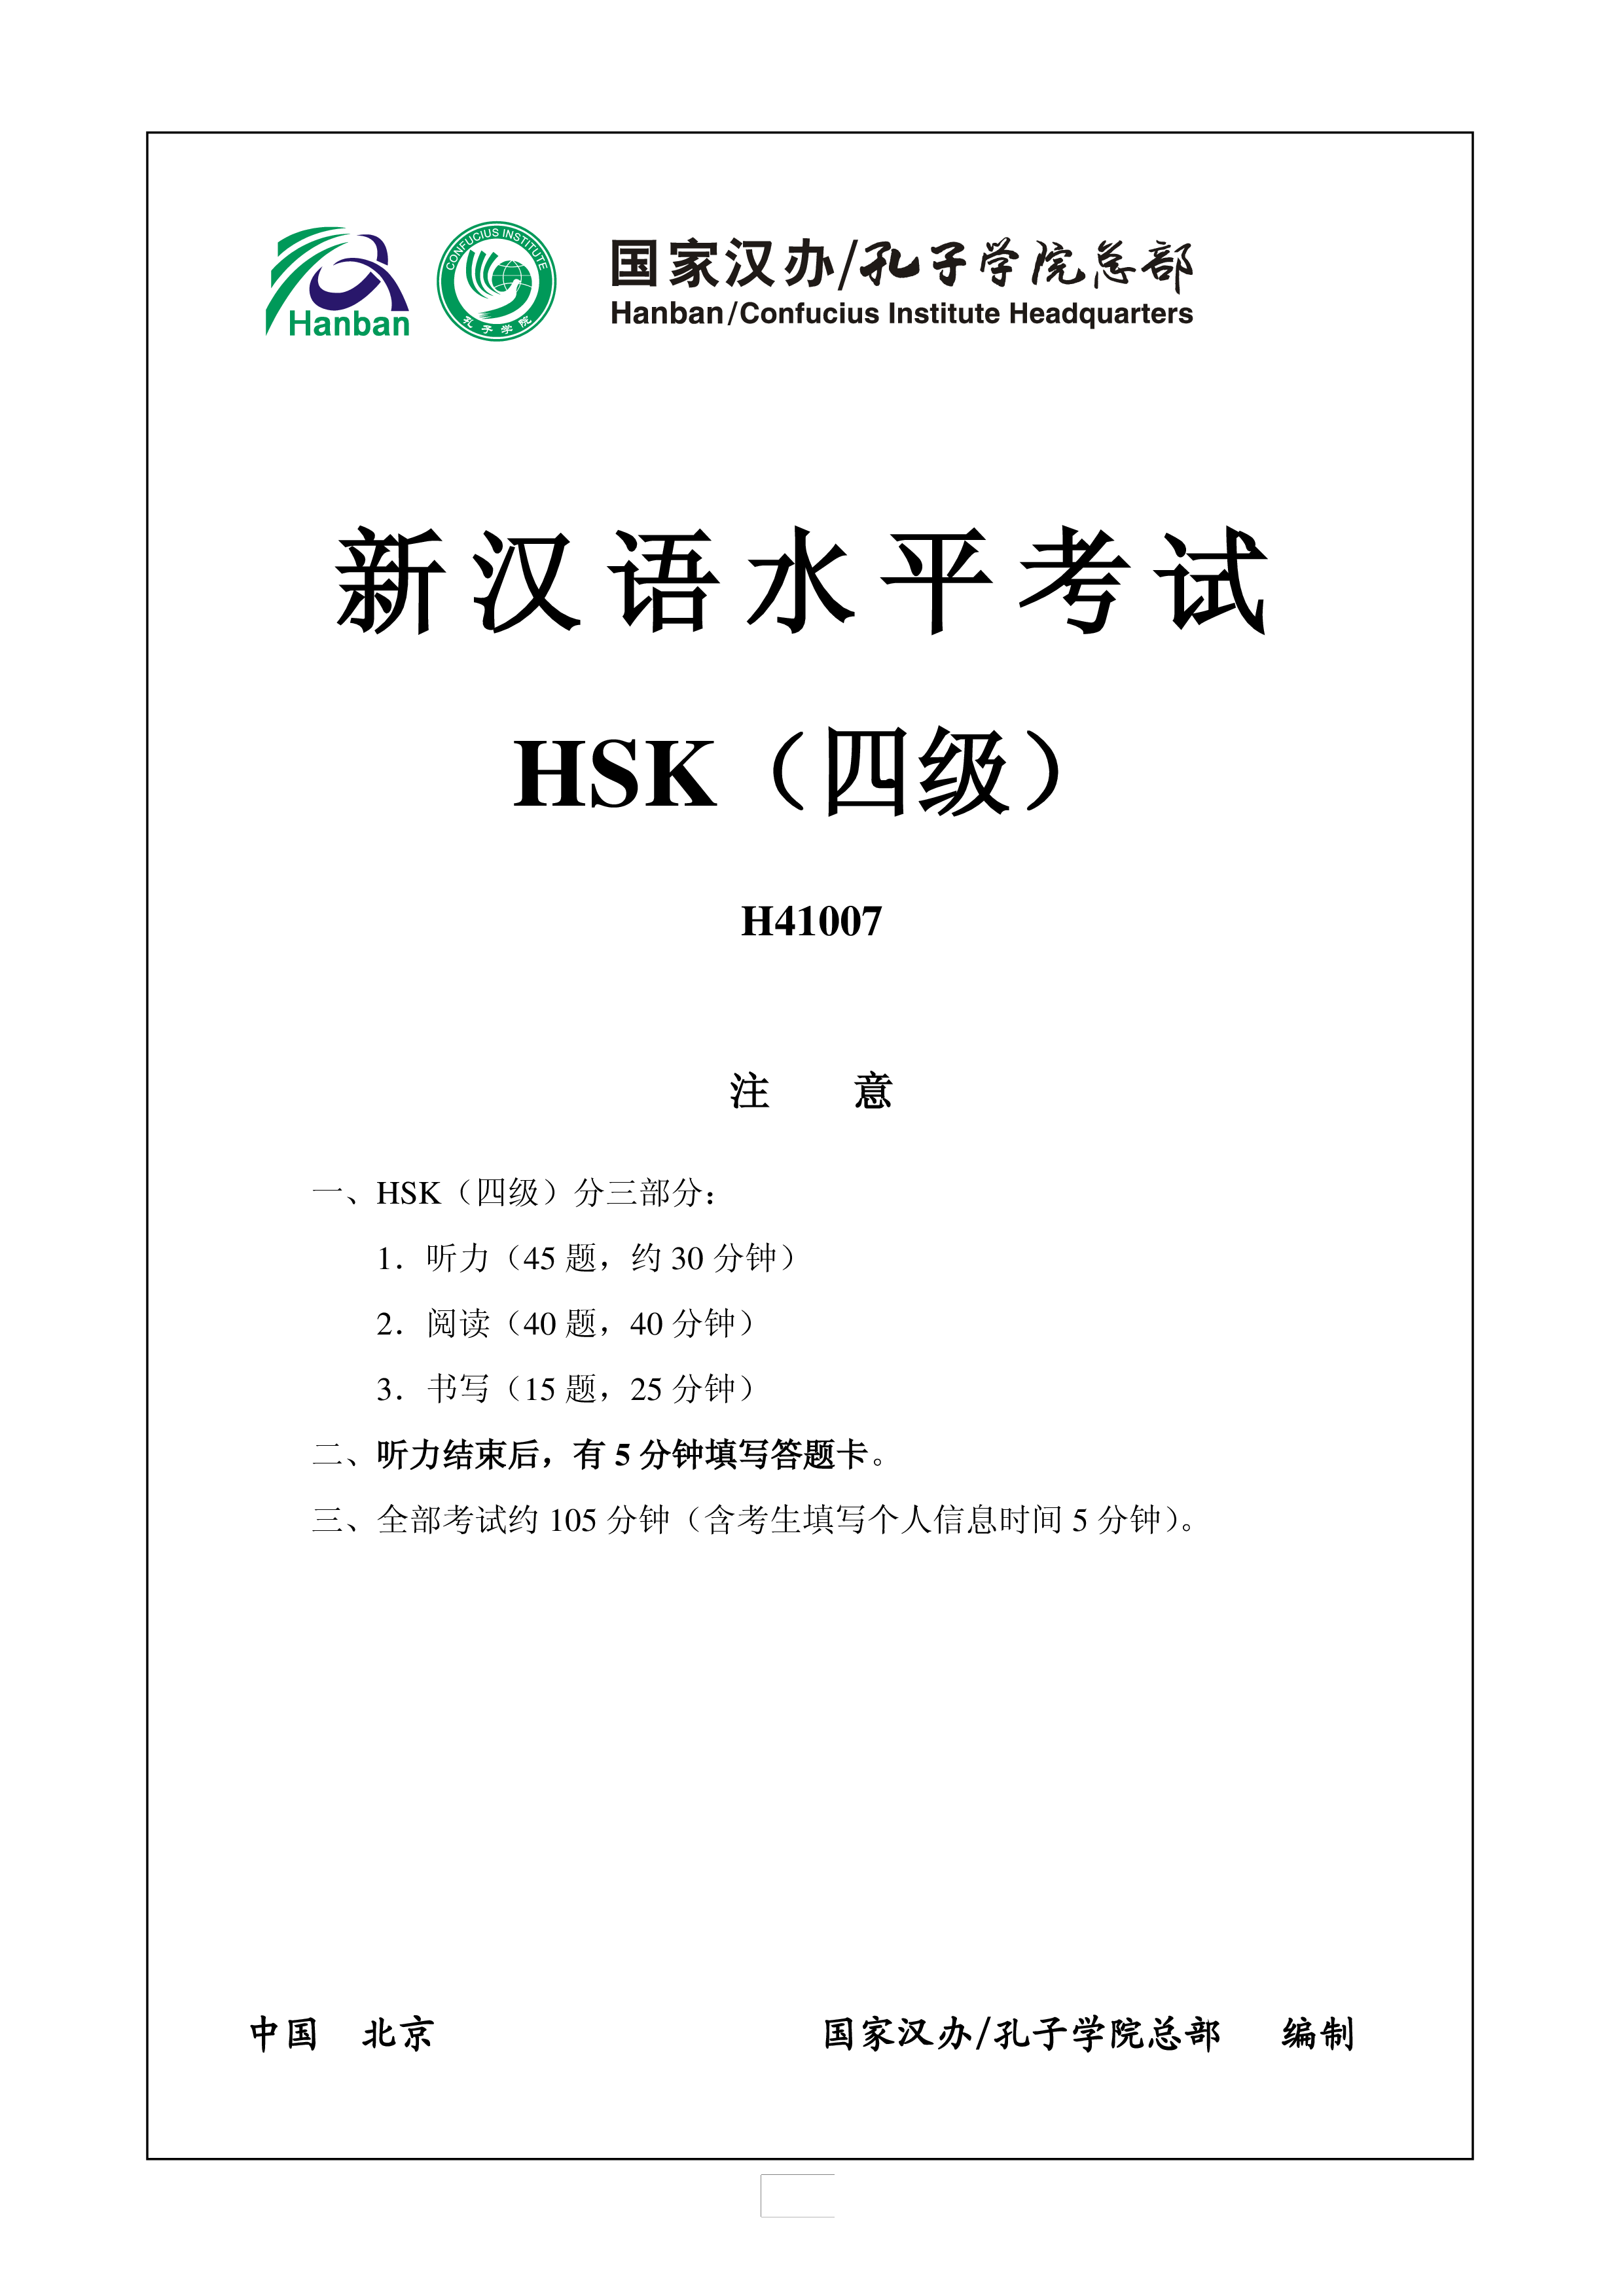 h41007 chinese exam hsk 4 incl audio and answers plantilla imagen principal